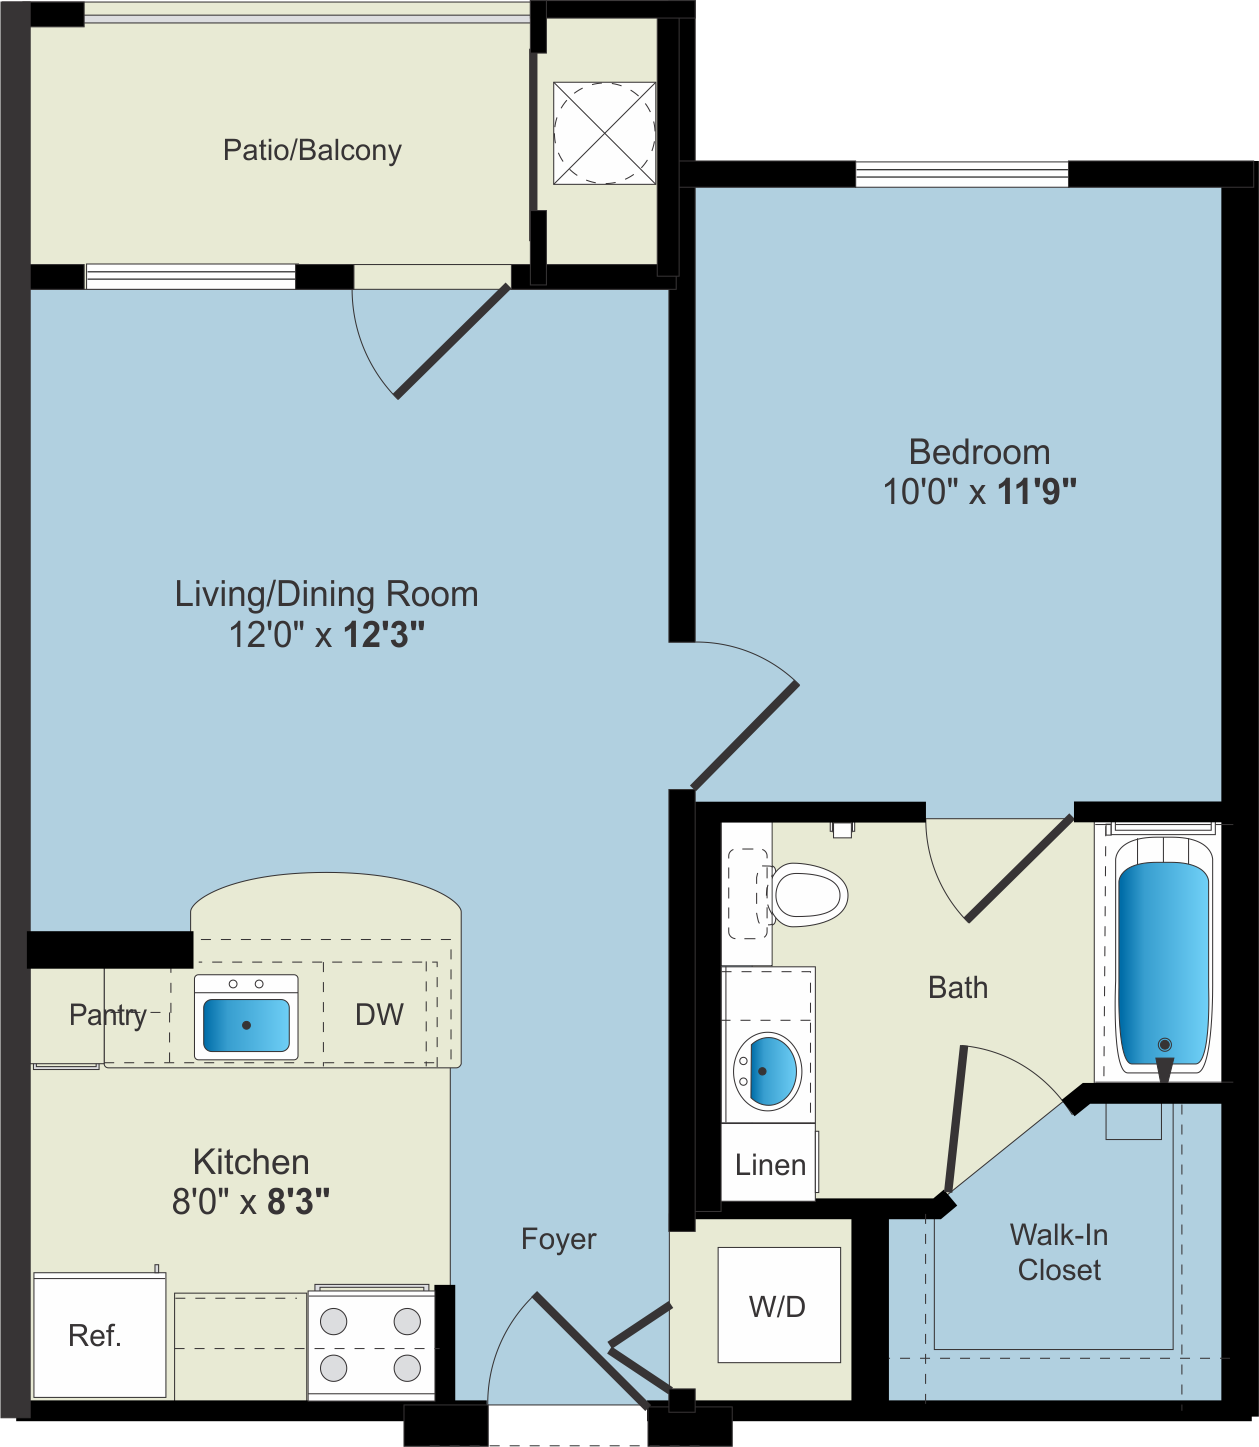 A one bedroom apartment floor plan for Apartment Rentals.